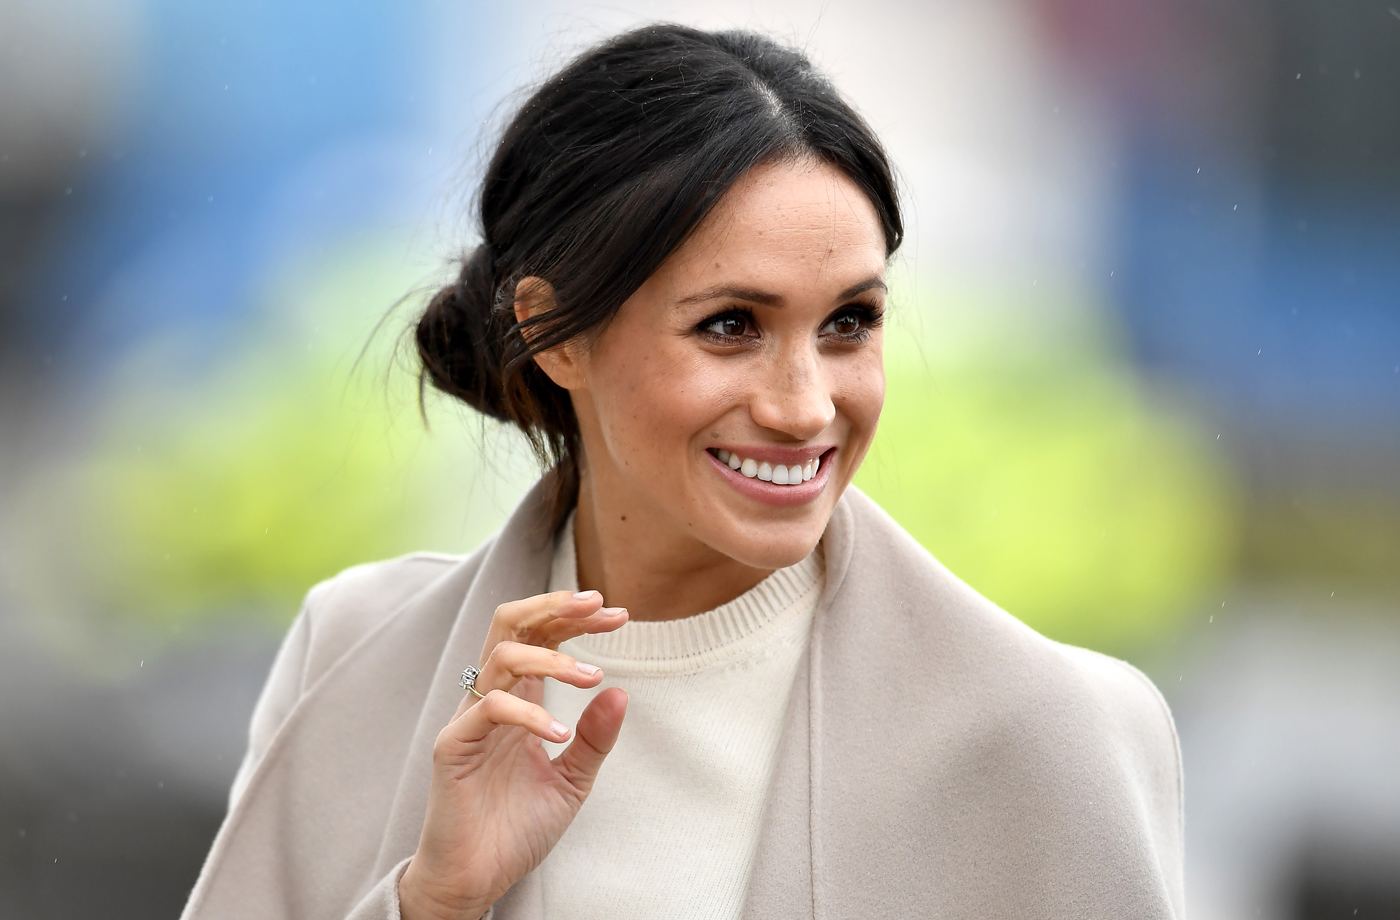 Meghan Markle is helping launch a charity cookbook